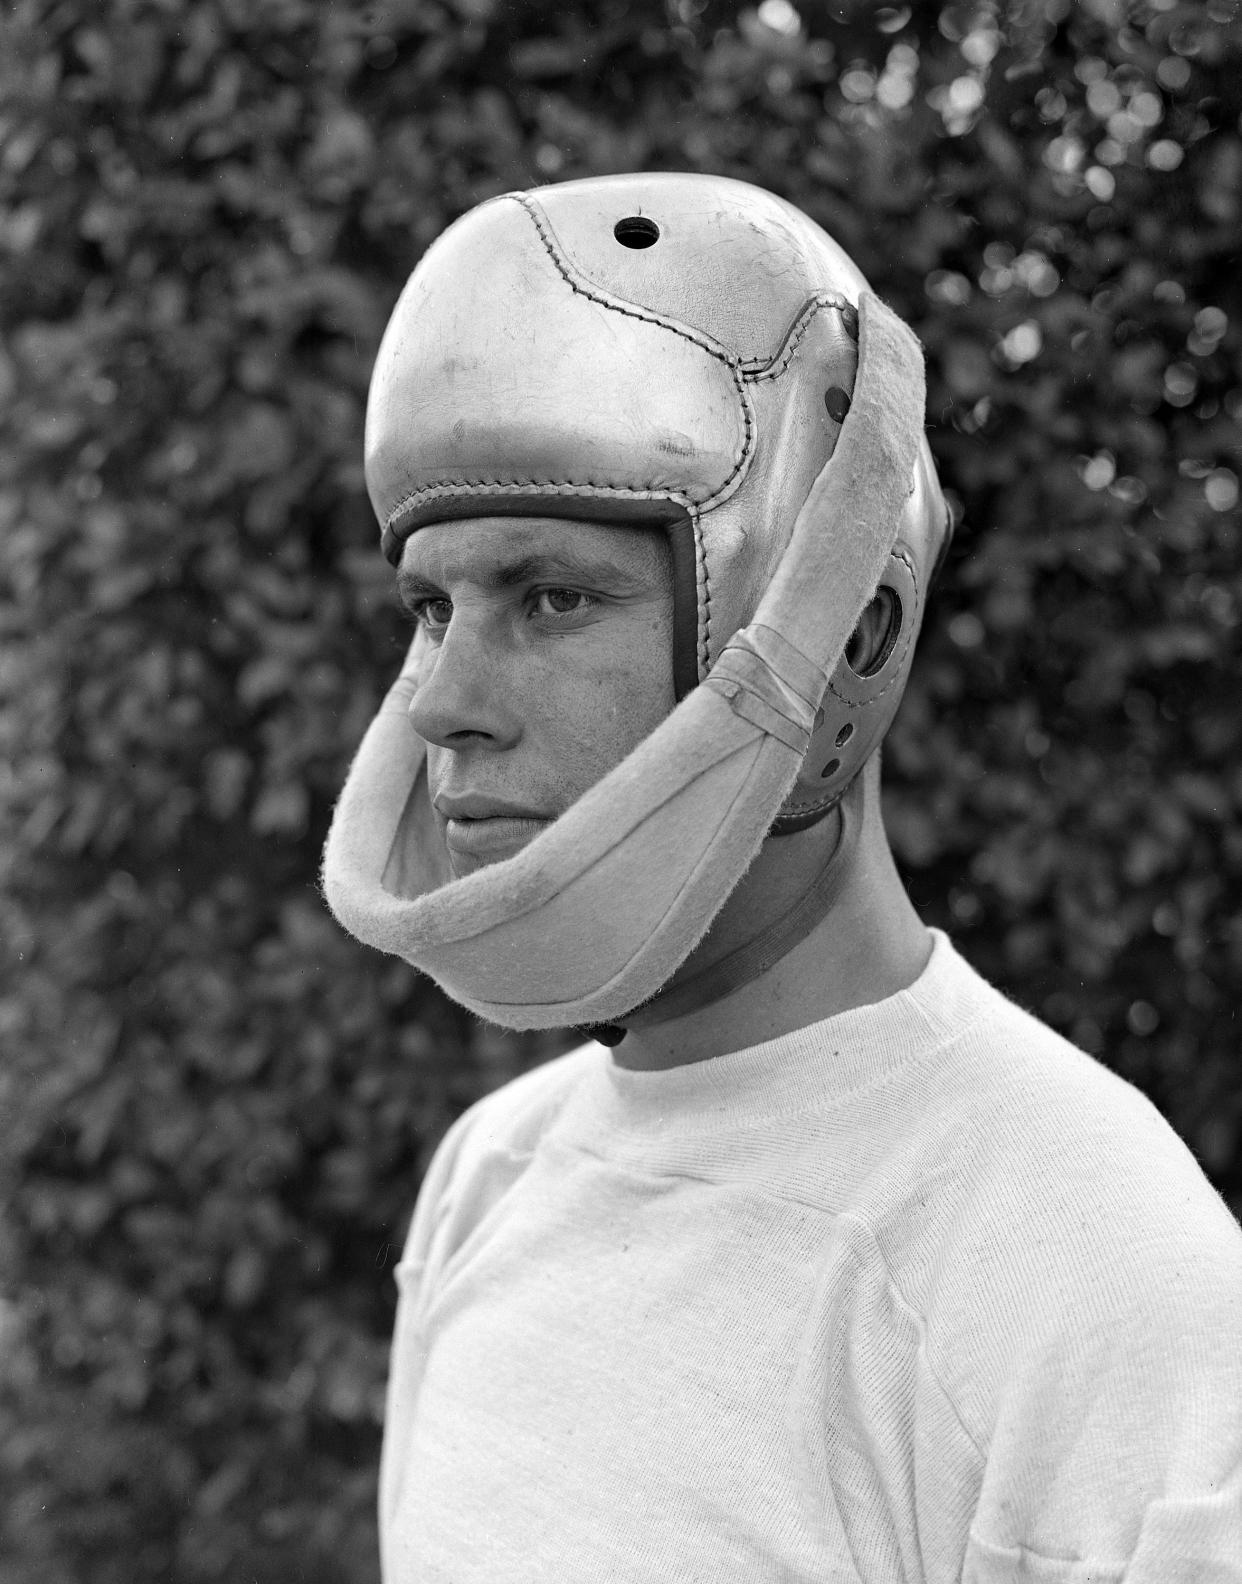 Frank Sinkwich, star left halfback of the University of Georgia, seen Oct. 24, 1941, wears a special brace to protect his jaw, which was broken in a game with North Carolina earlier in the season.  (AP Photo)